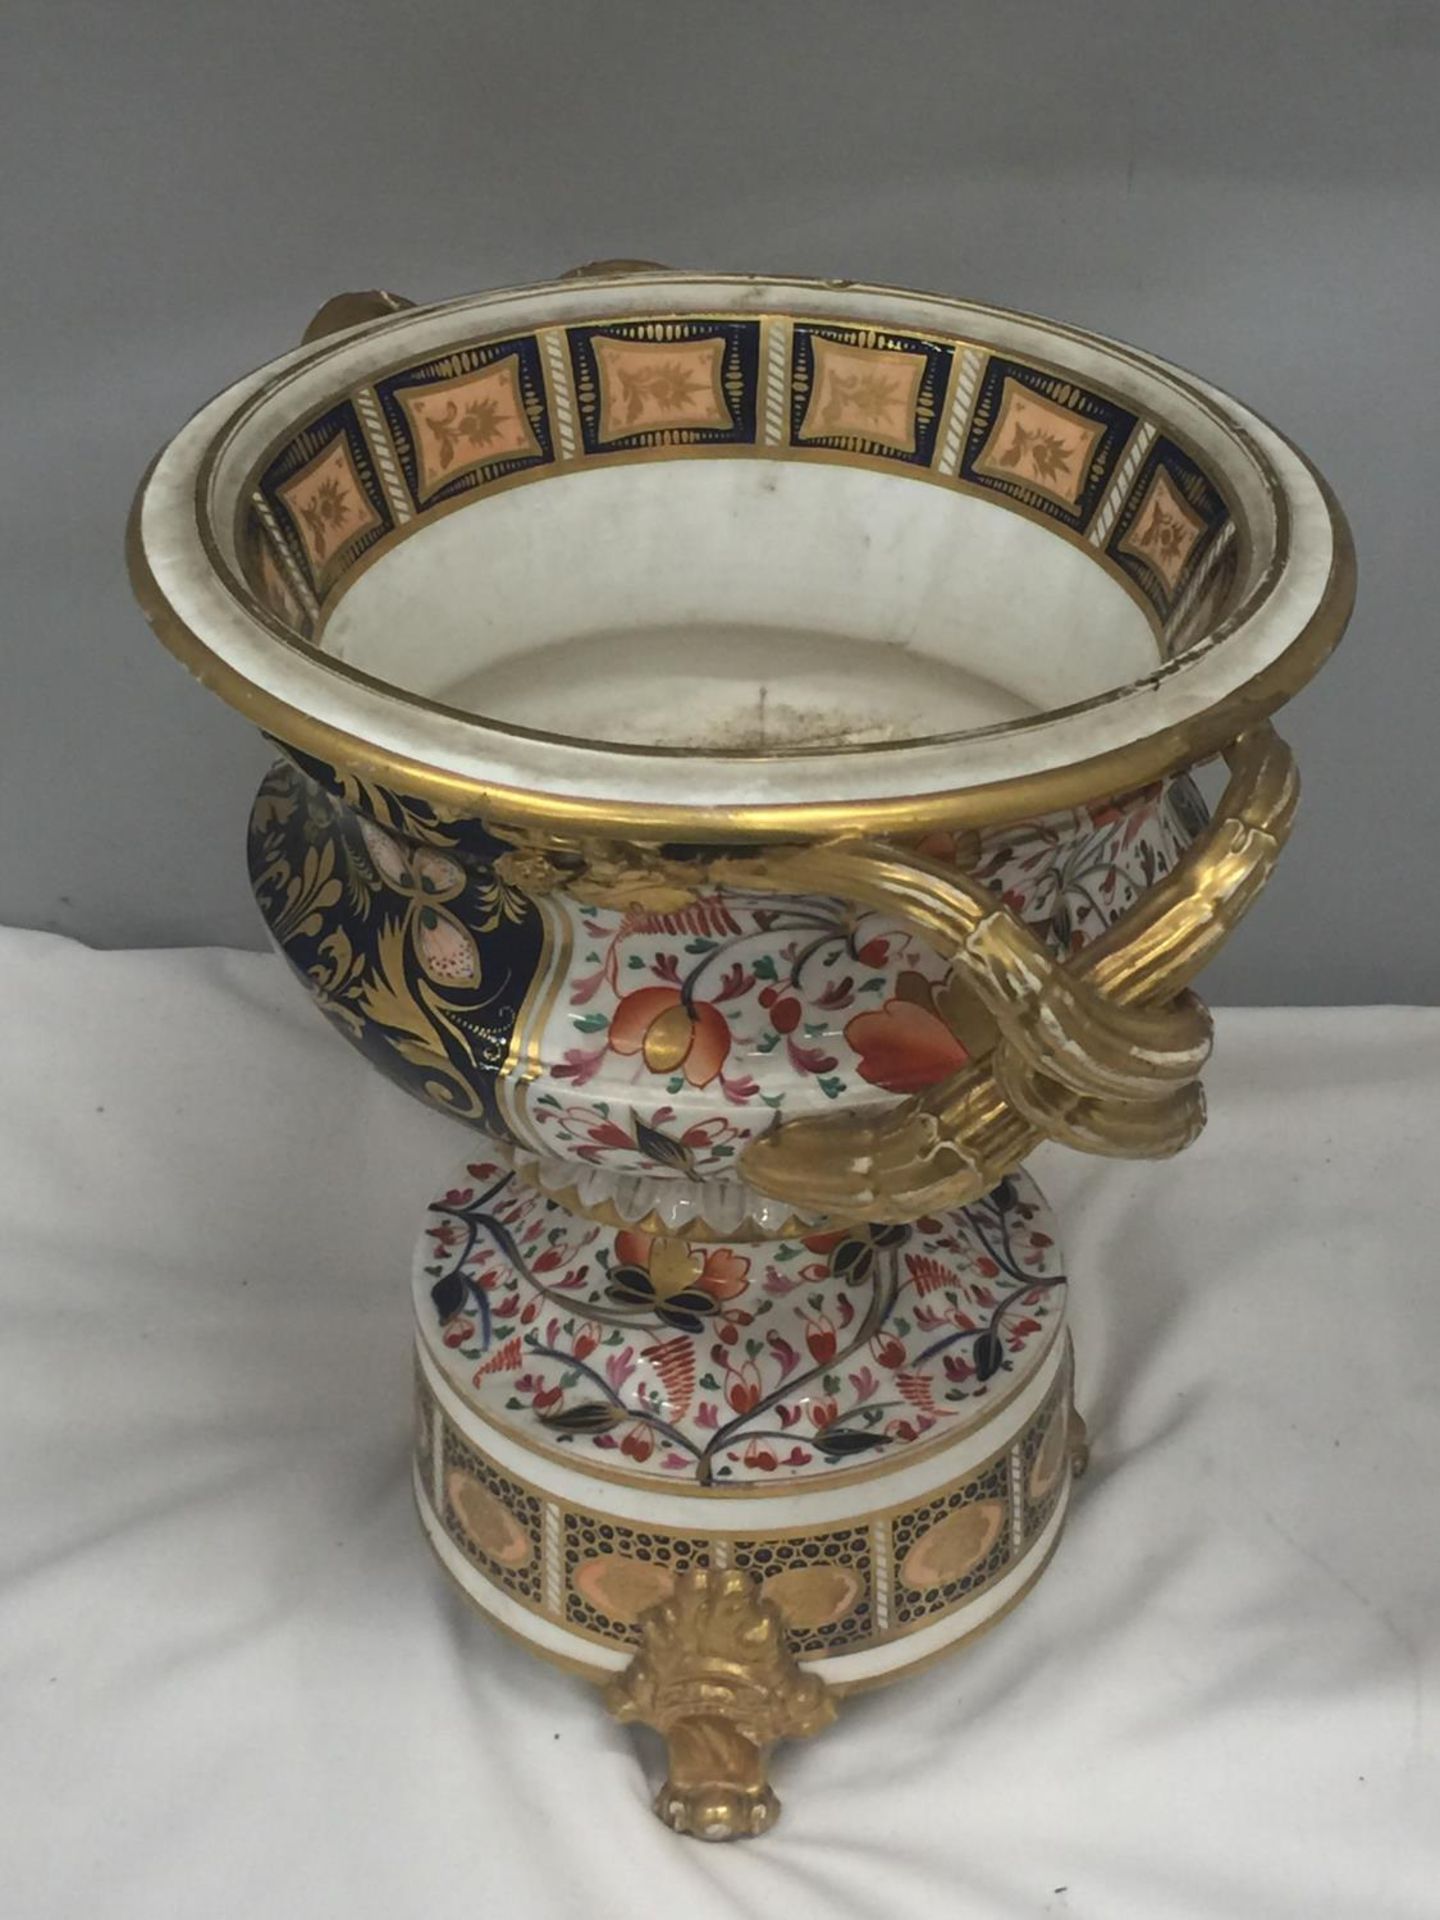 A MID 19TH CENTURY PORCELAIN CAMPANA SHAPED URN ON STAND WITH ELABORATE GILT DECORATION, HEIGHT 32CM - Image 2 of 4